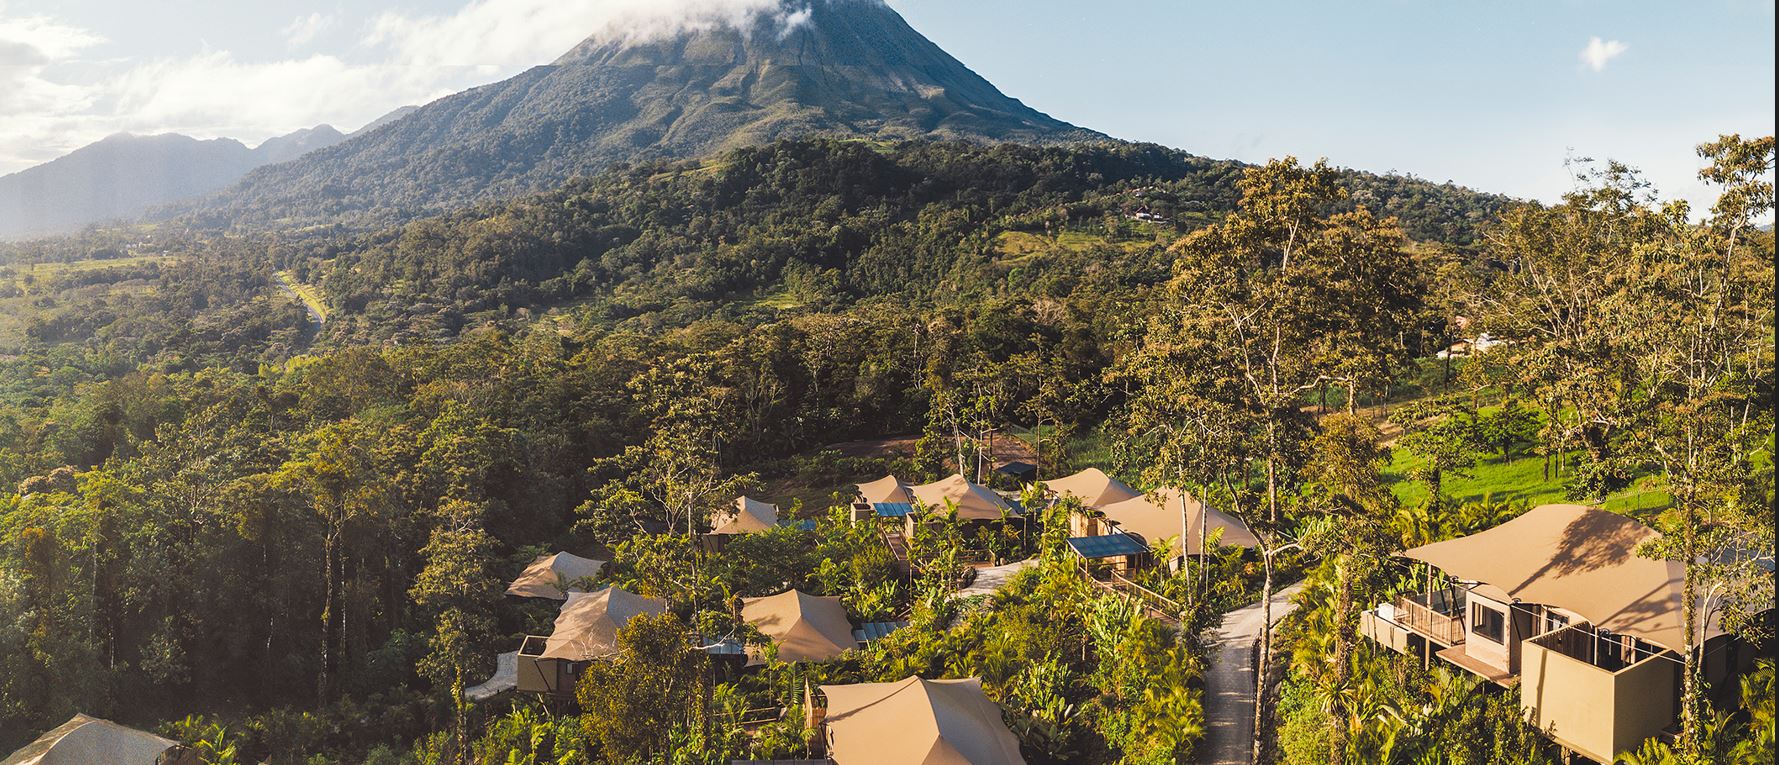 5 of the Finest Luxurious Wellness Retreats in Costa Rica